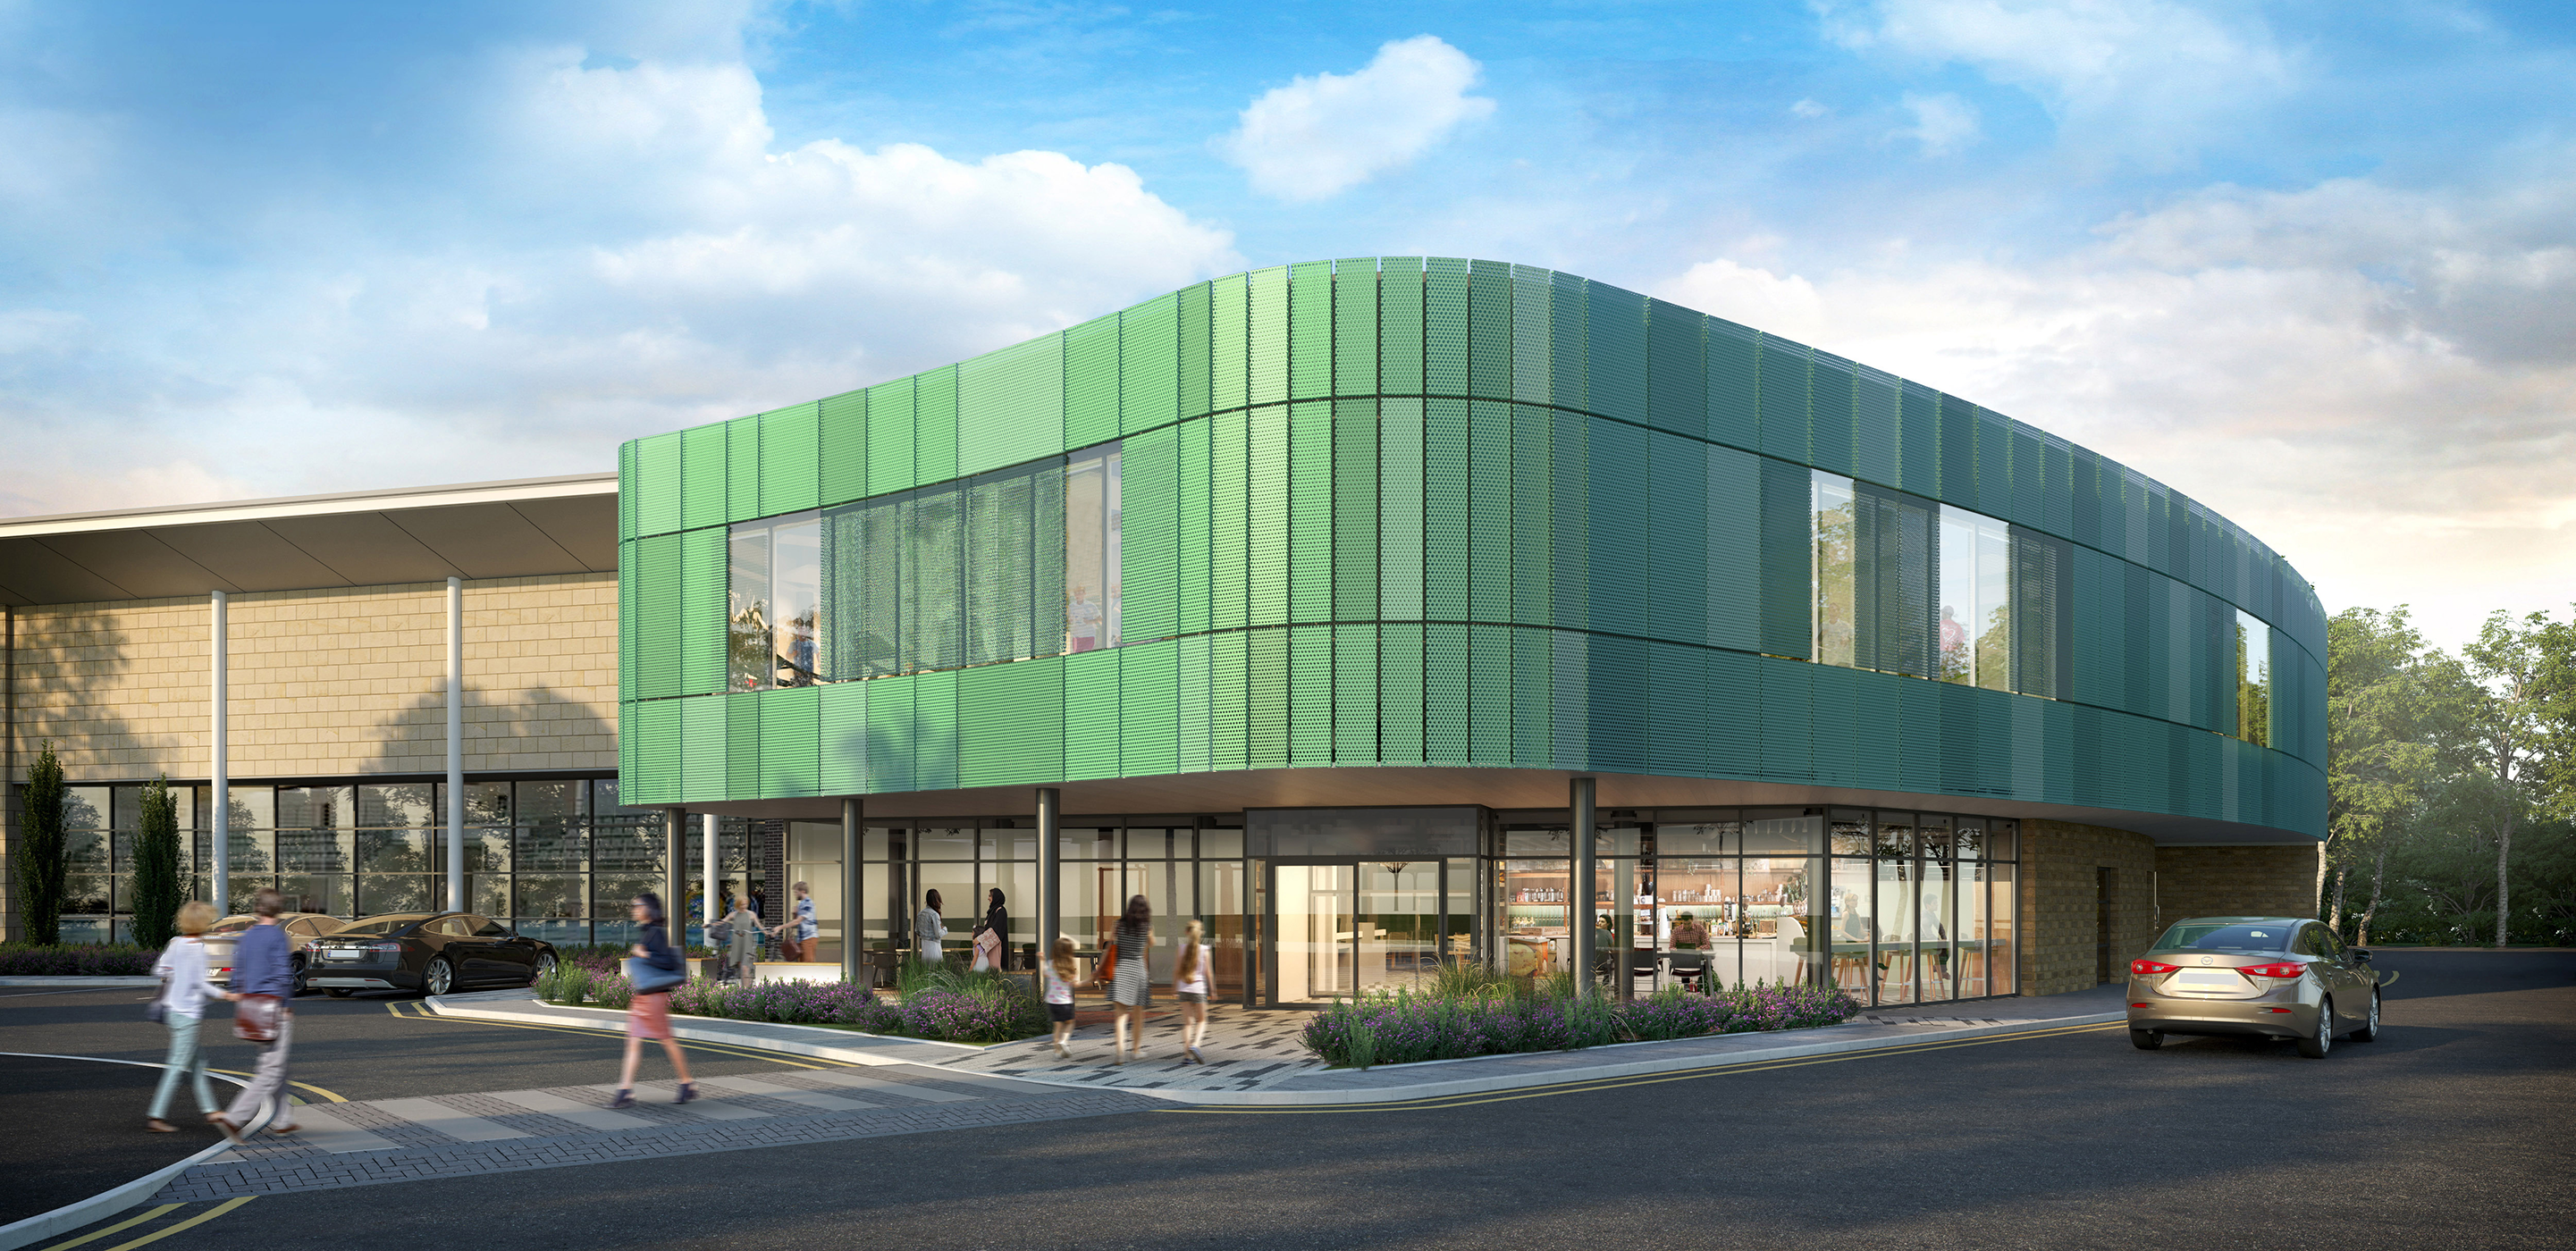 Image of the new Harrogate Leisure and Wellness Centre